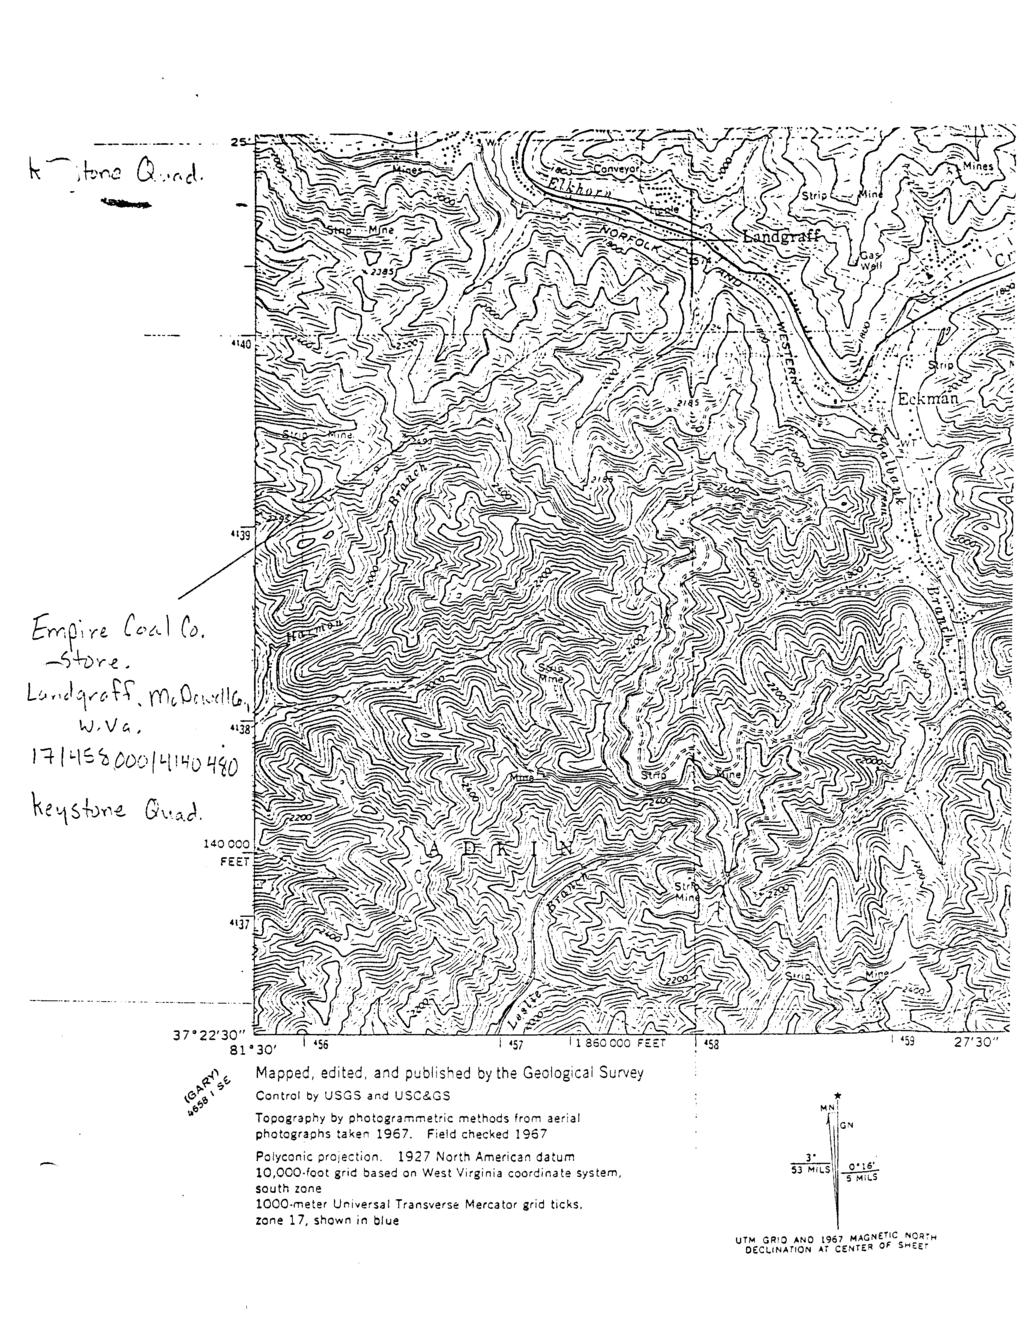 4\56 Mapped, edited, and published by the Geological Survey \$% \ Control by USGS and USC&GS,a'. Topography by photogrammetric methods from aerial photographs taken 1967.